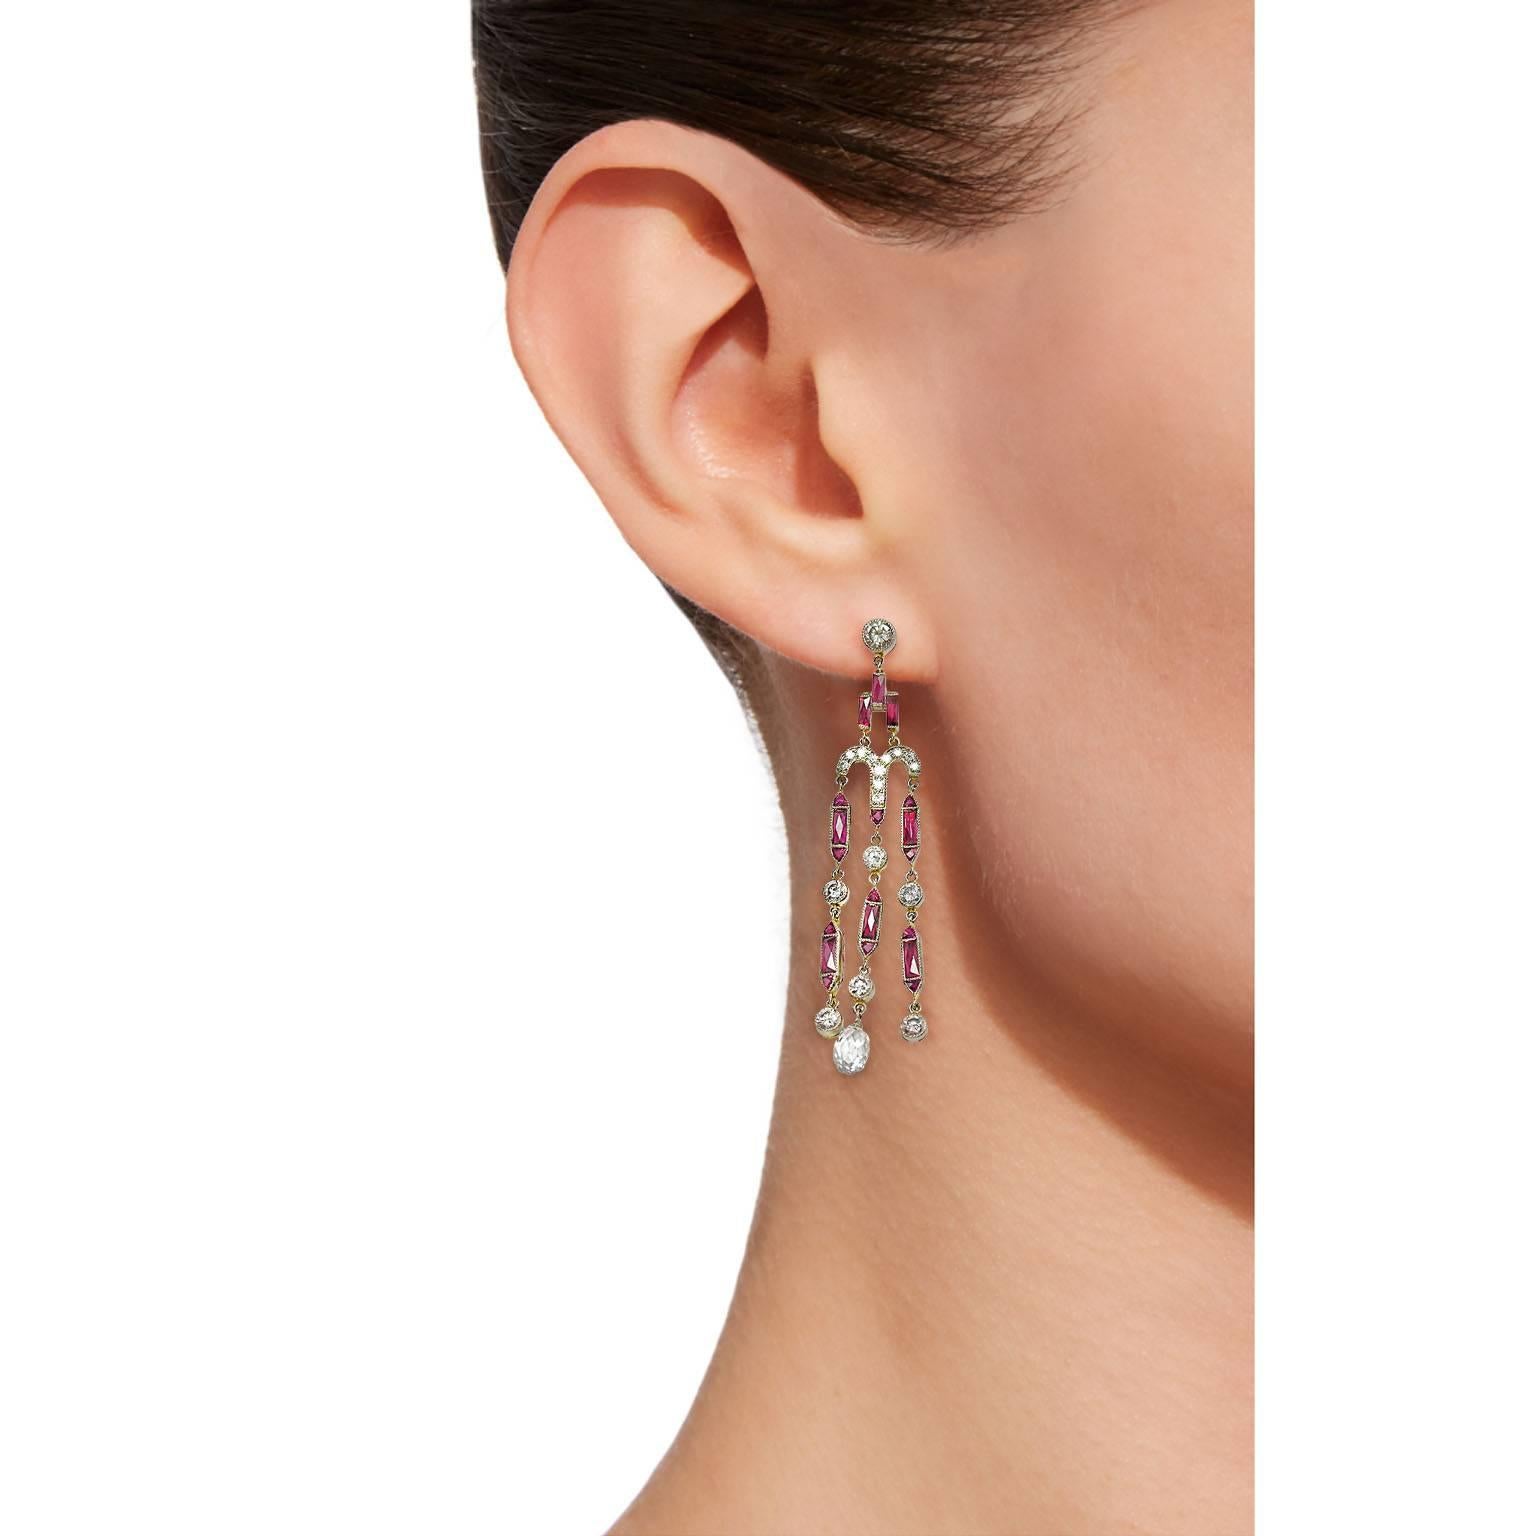 A pair of articulated white diamond and ruby chandelier earrings, mounted in platinum hand crafted in Italy by Jona.

All Jona jewelry is new and has never been previously owned or worn. Each item will arrive at your door beautifully gift wrapped